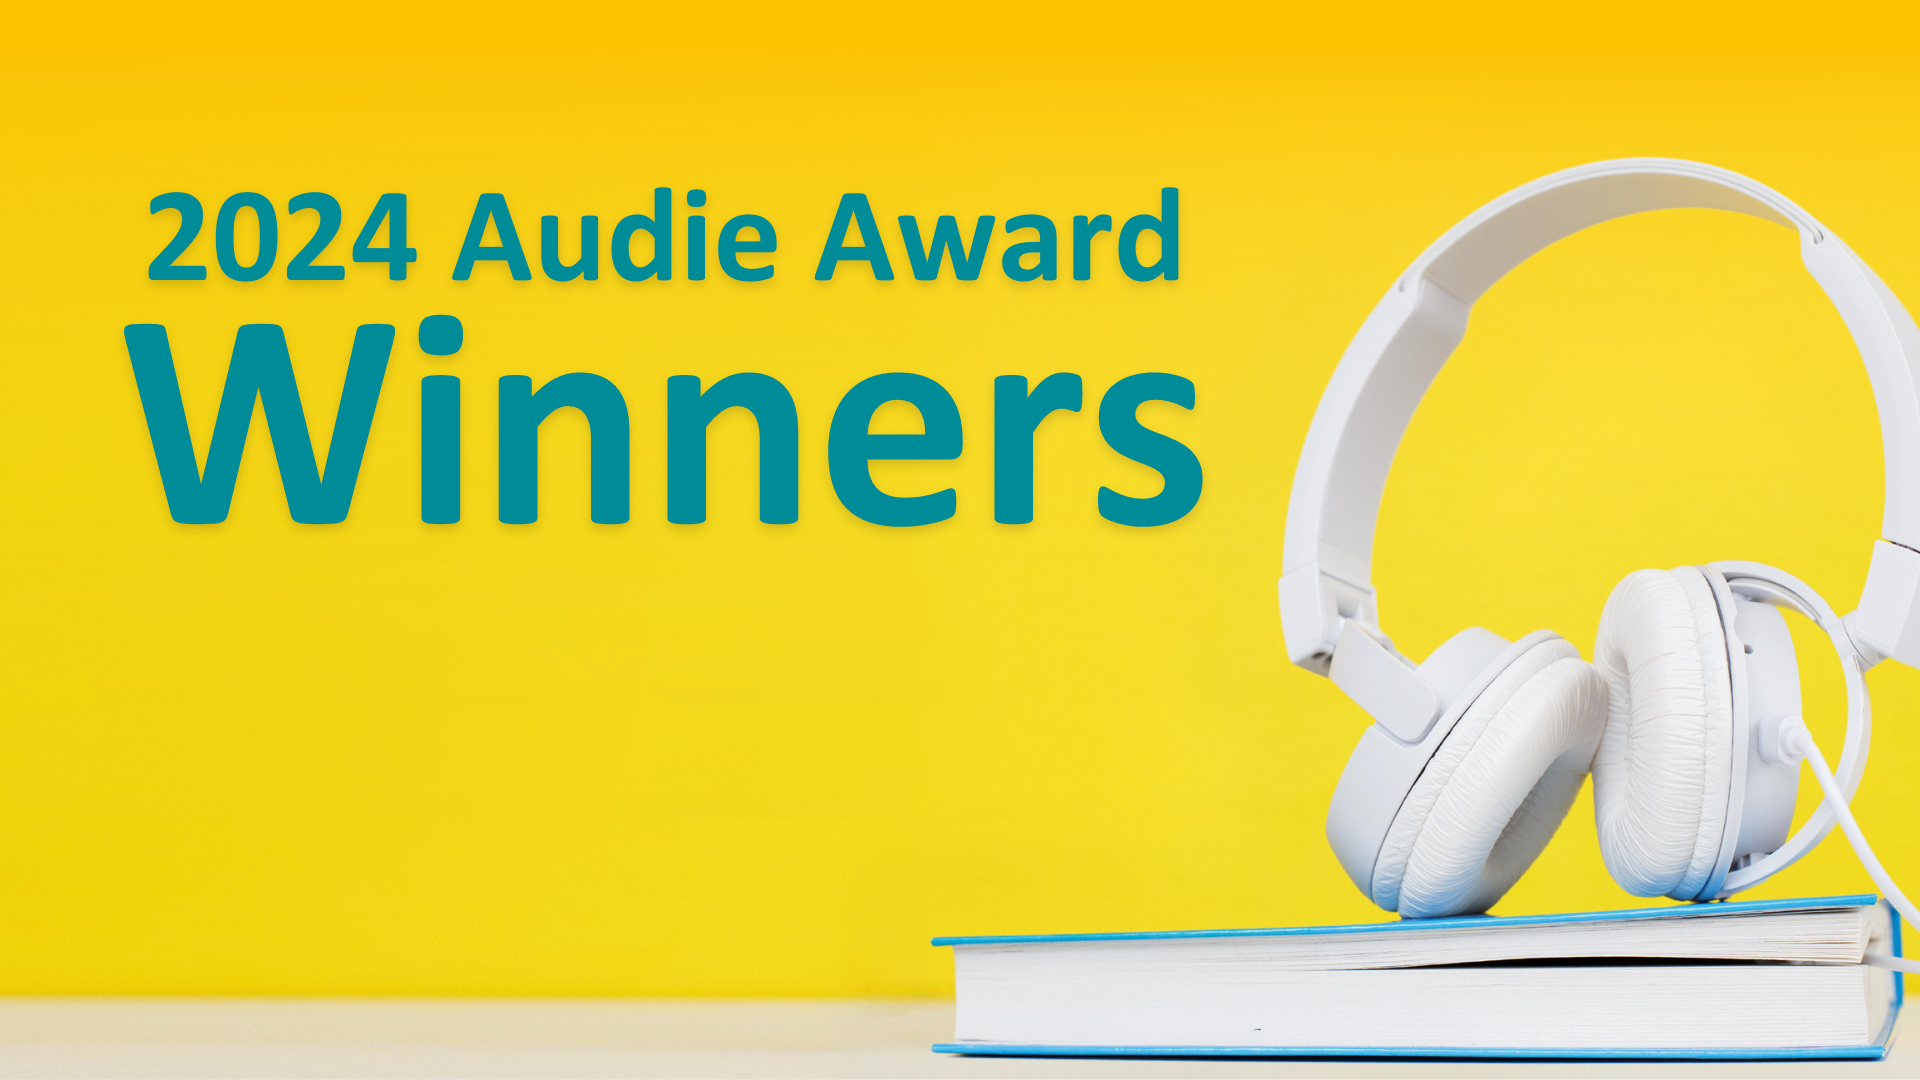 Headphones resting on a book. Text reads 2024 Audie Award Winners.